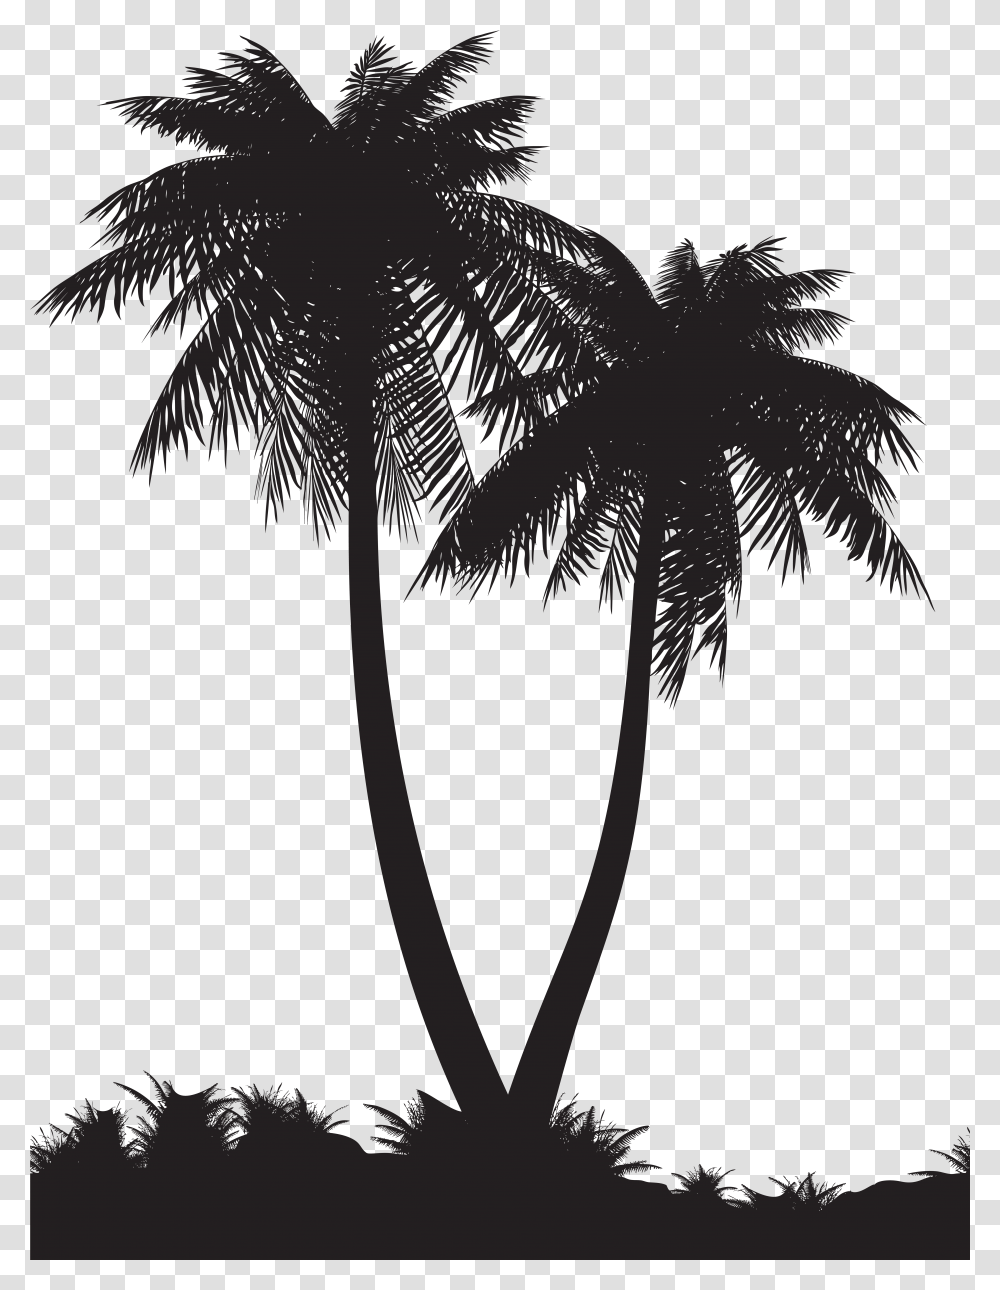 Palm Tree Silhouette Download Silhouette Of Palm Tree, Plant, Arecaceae, Flower, Blossom Transparent Png